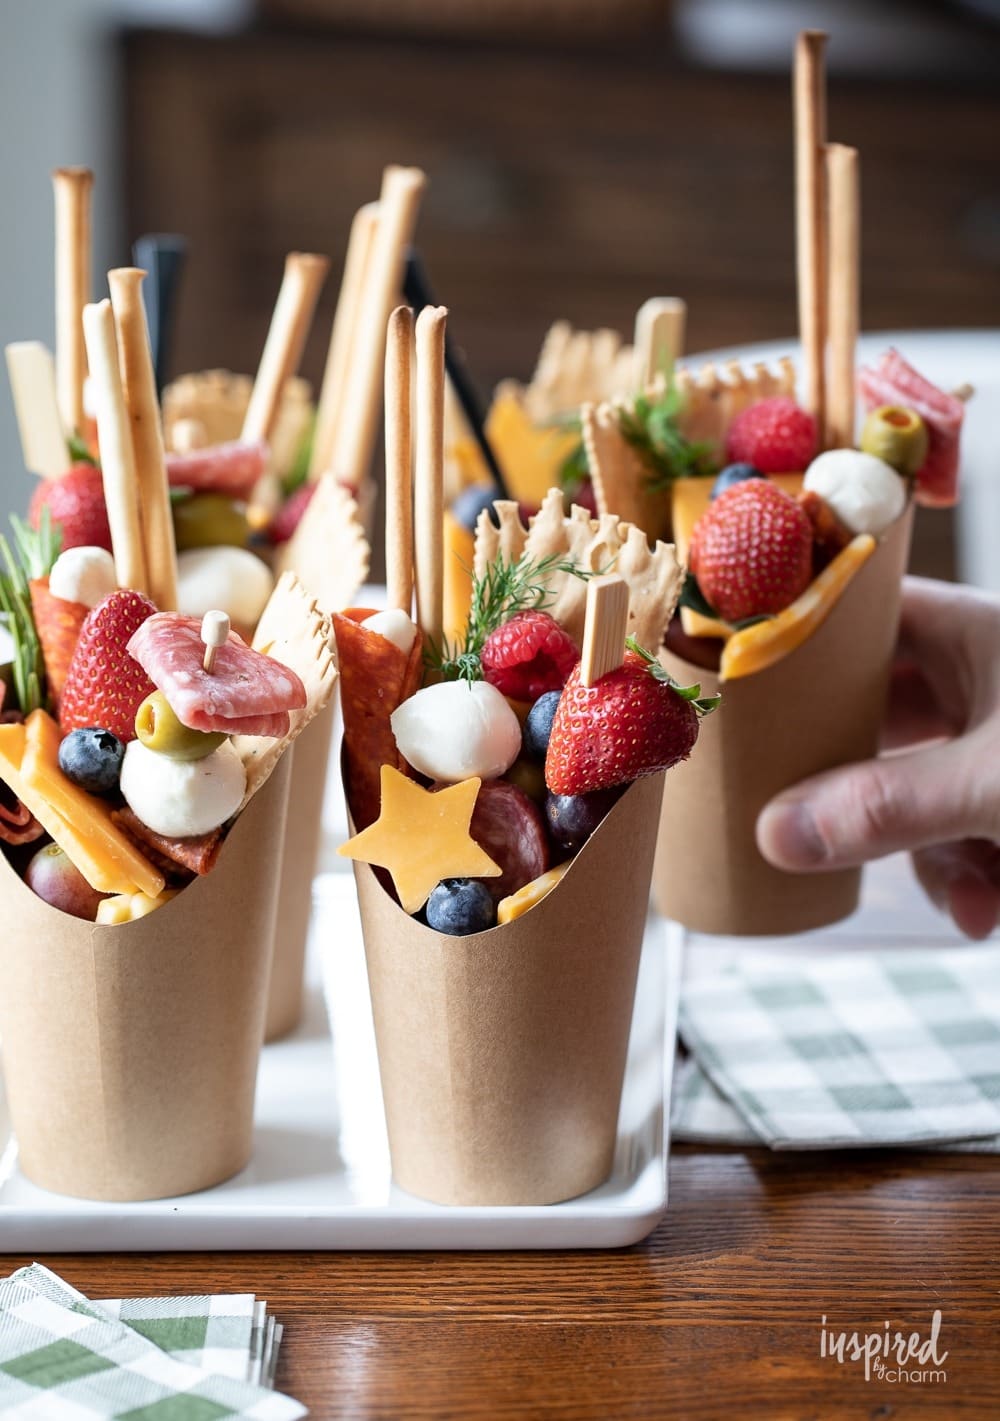 Meats, cheeses, fruits, and nuts on skewers served on paper cups.